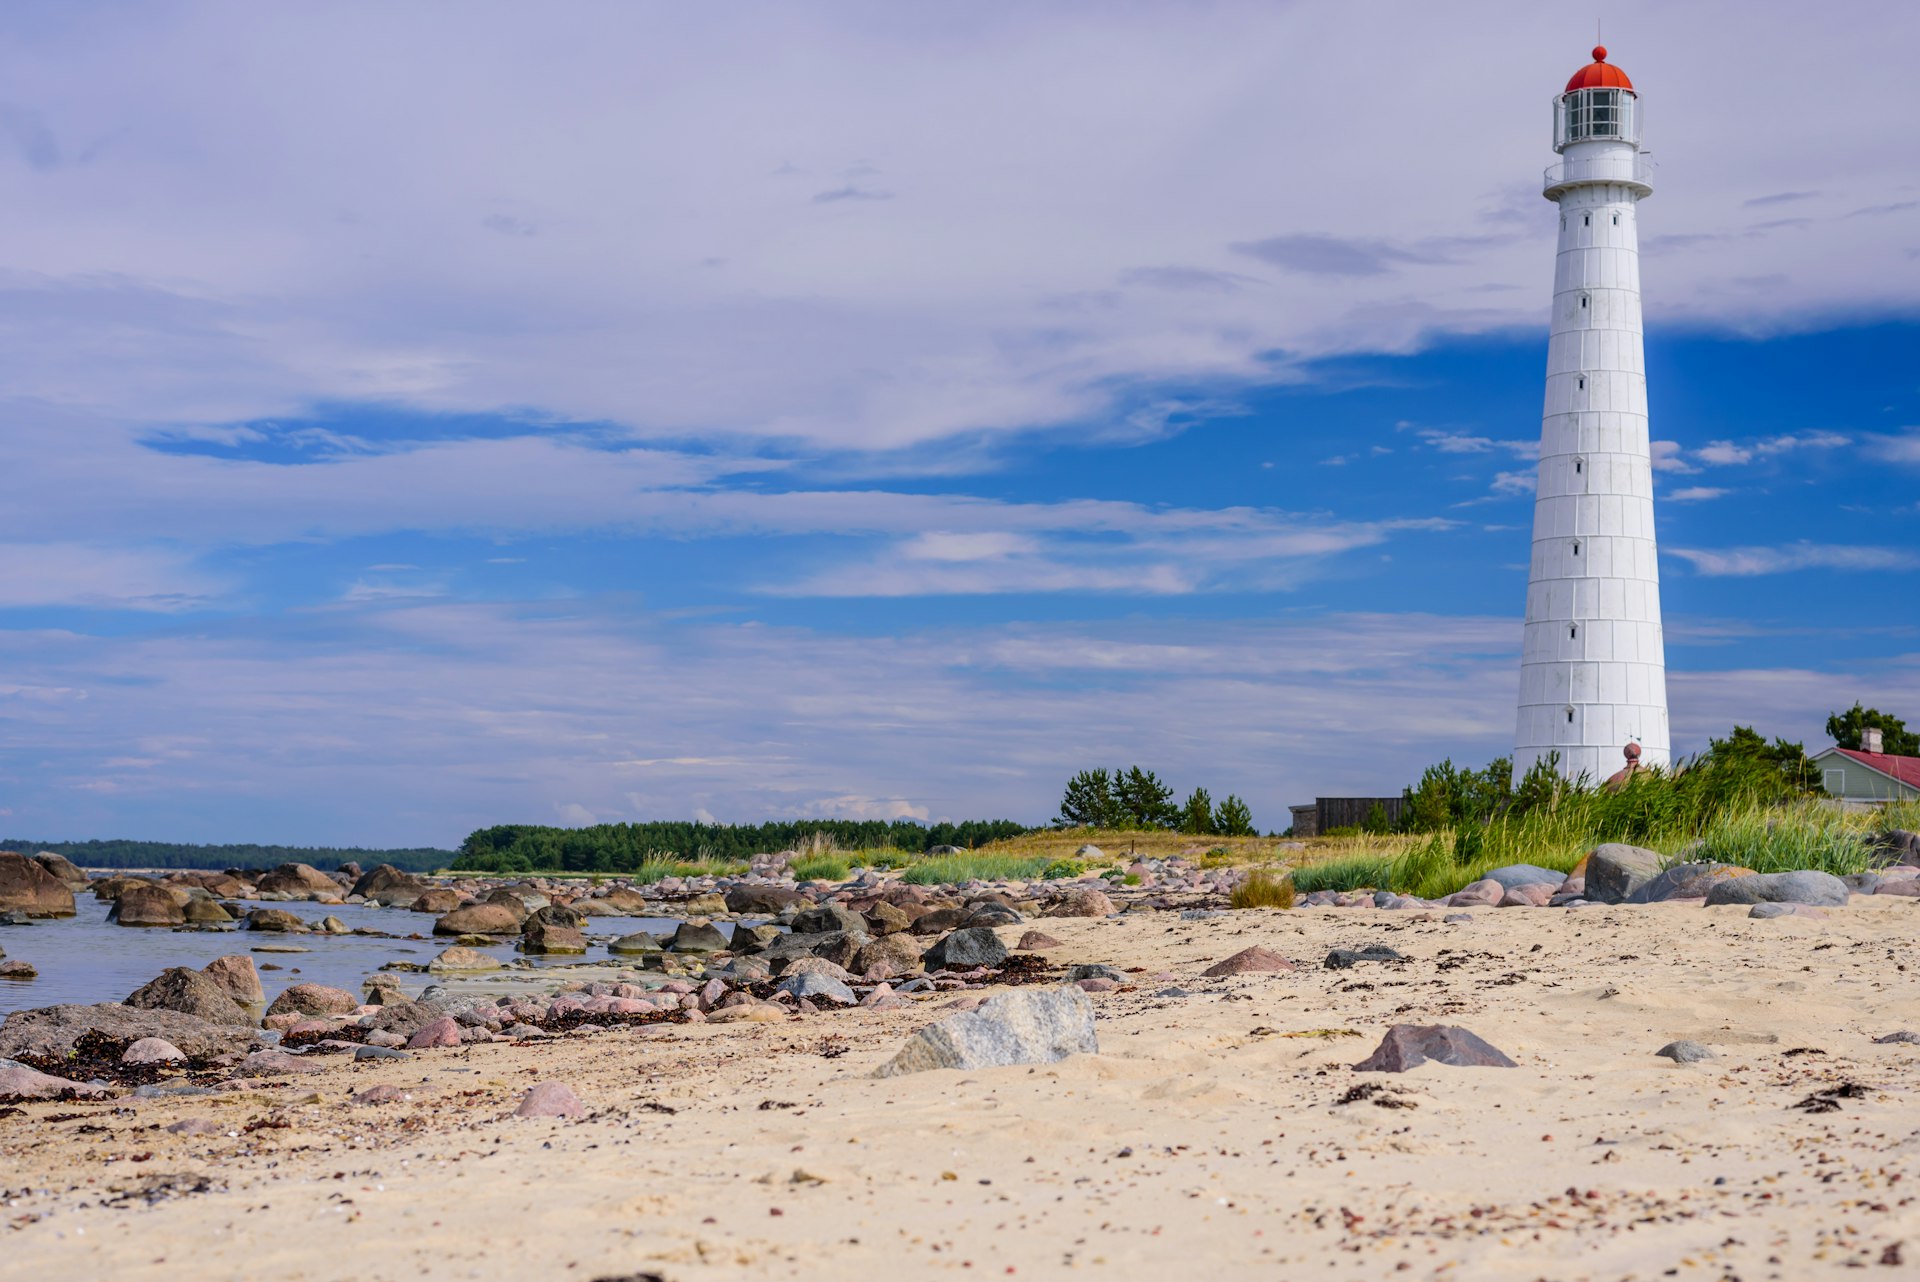 A large white lighthouse on a deserted rocky and sand beach